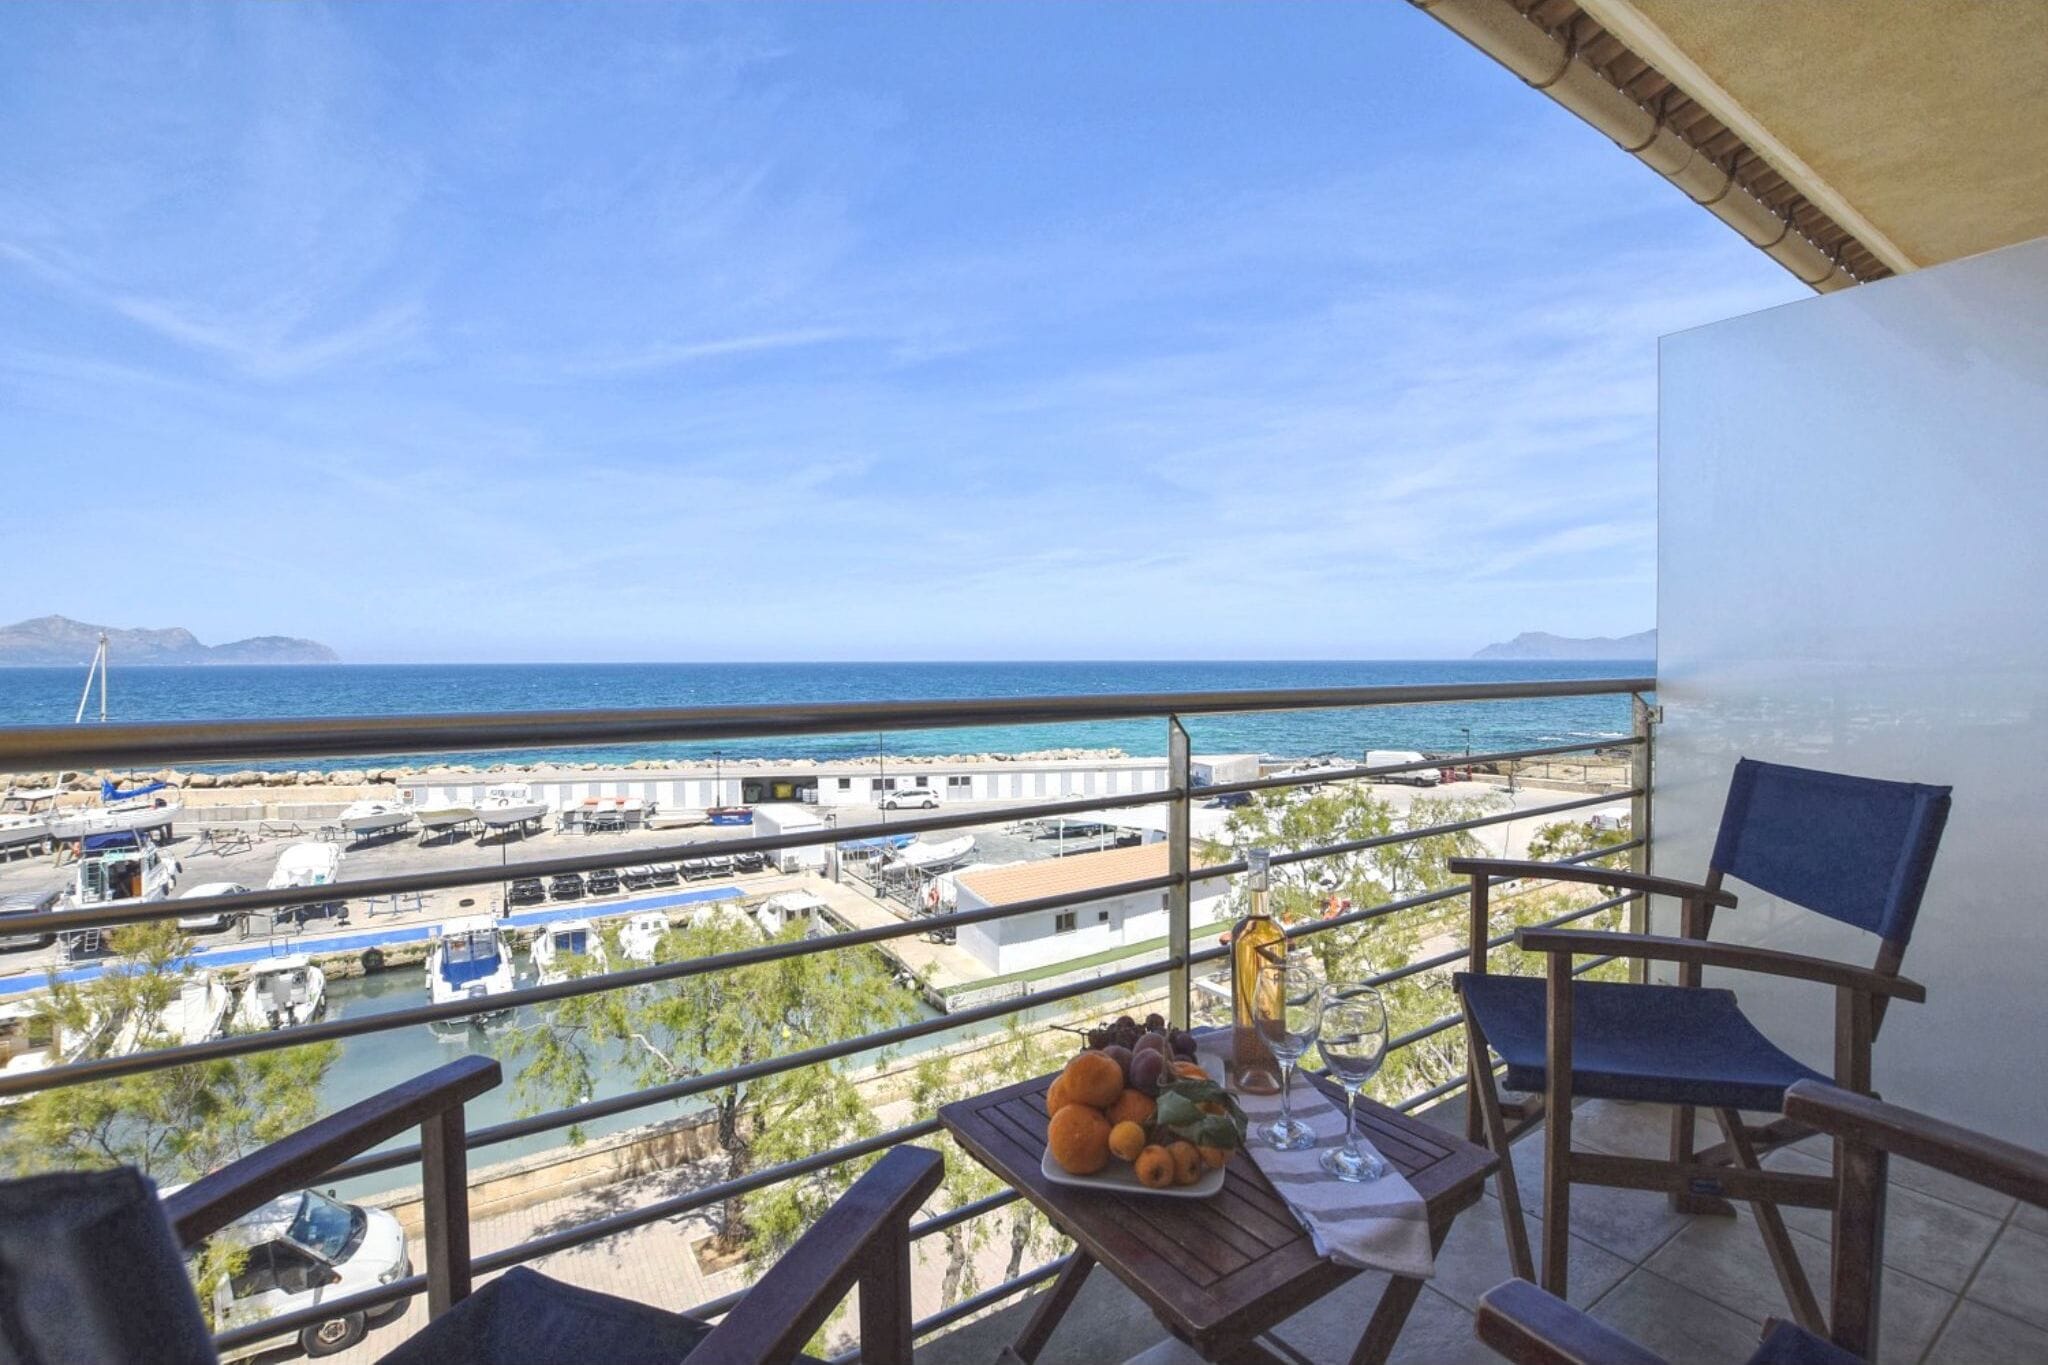 Modern apartment in Can Picafort nice view of the harbor, 50 m from the beach